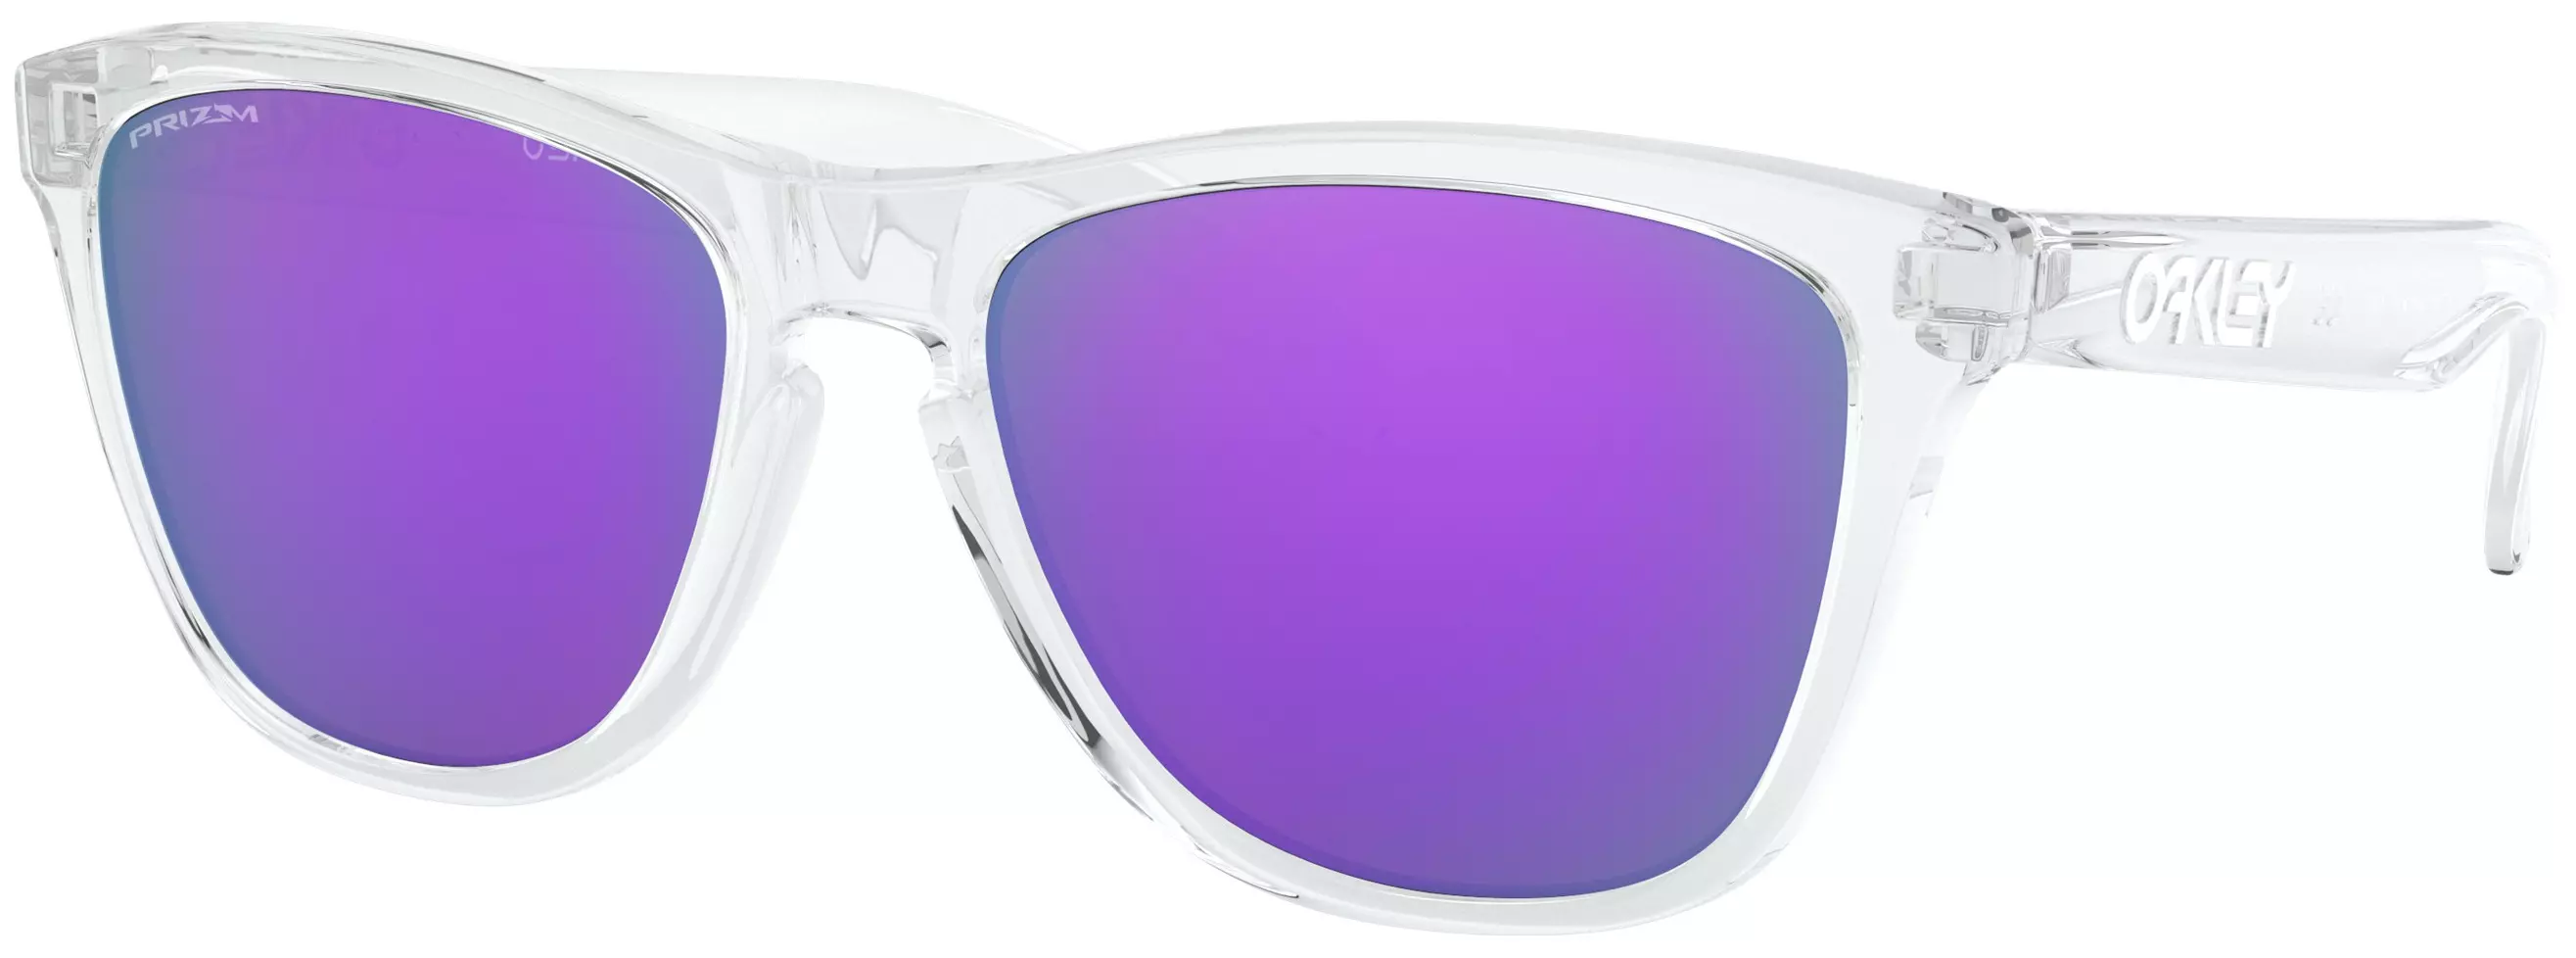 Sunglasses Oakley Frogskins OO9013-H755 | Shop Extreme Vital